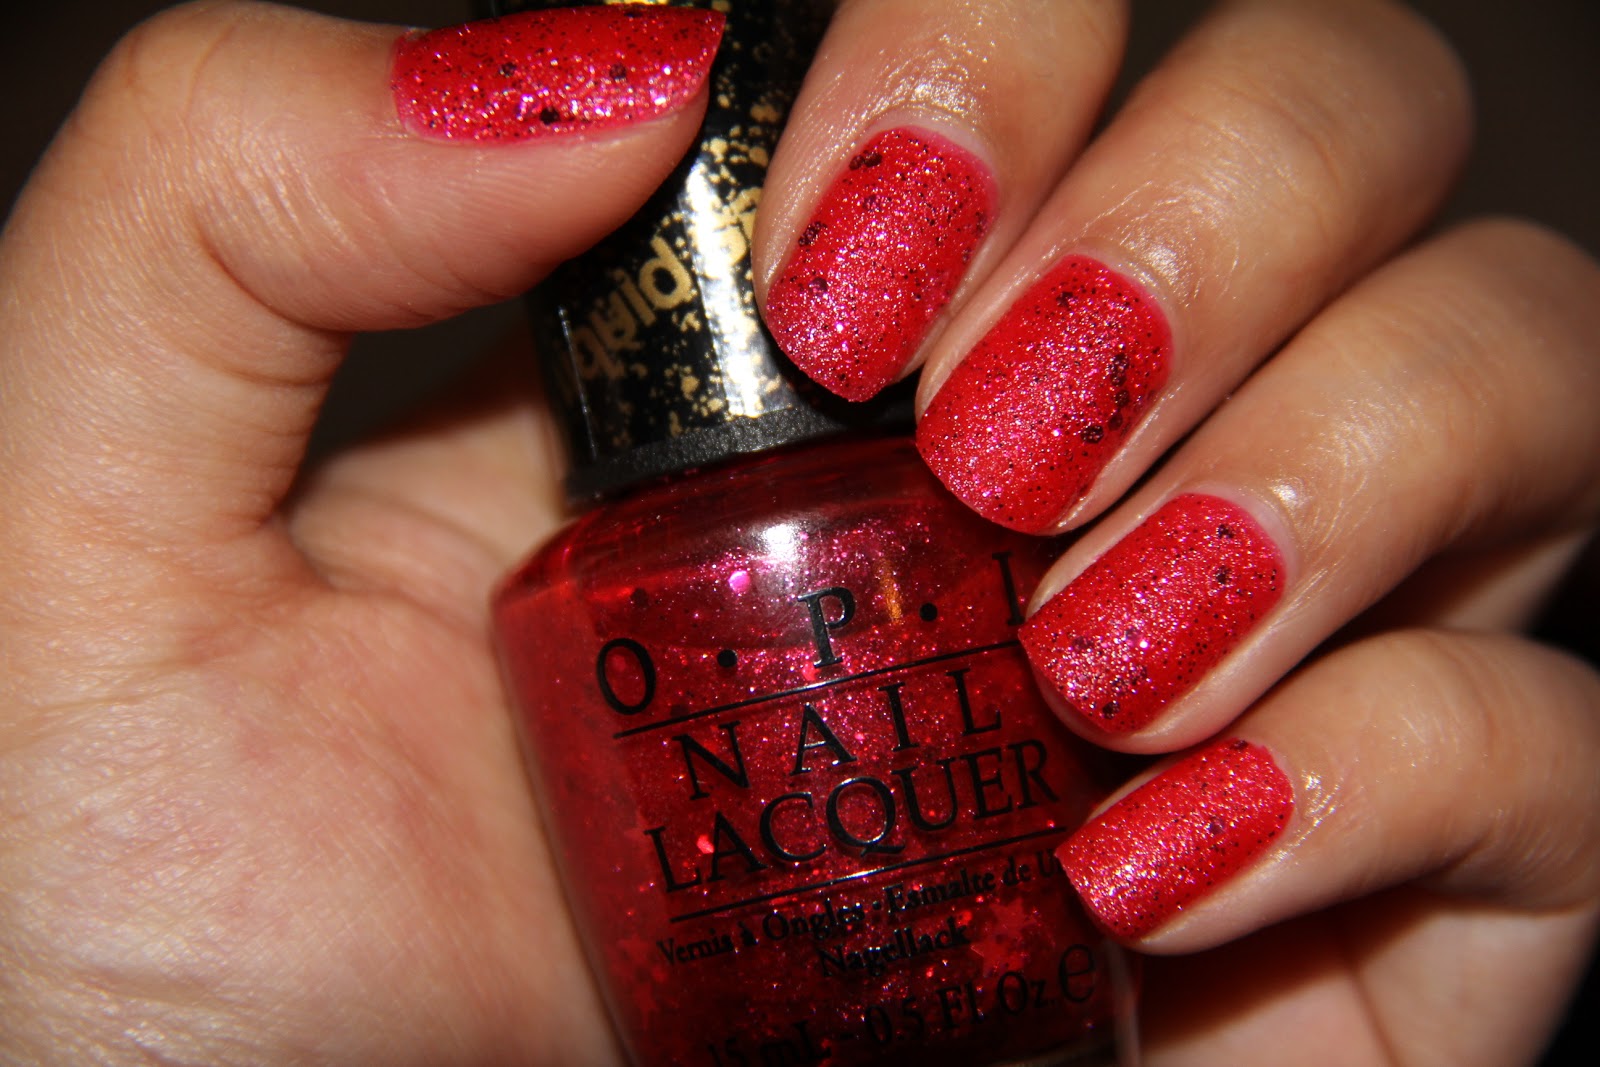 1. OPI Liquid Sand Nail Polish in "Can't Let Go" - wide 9